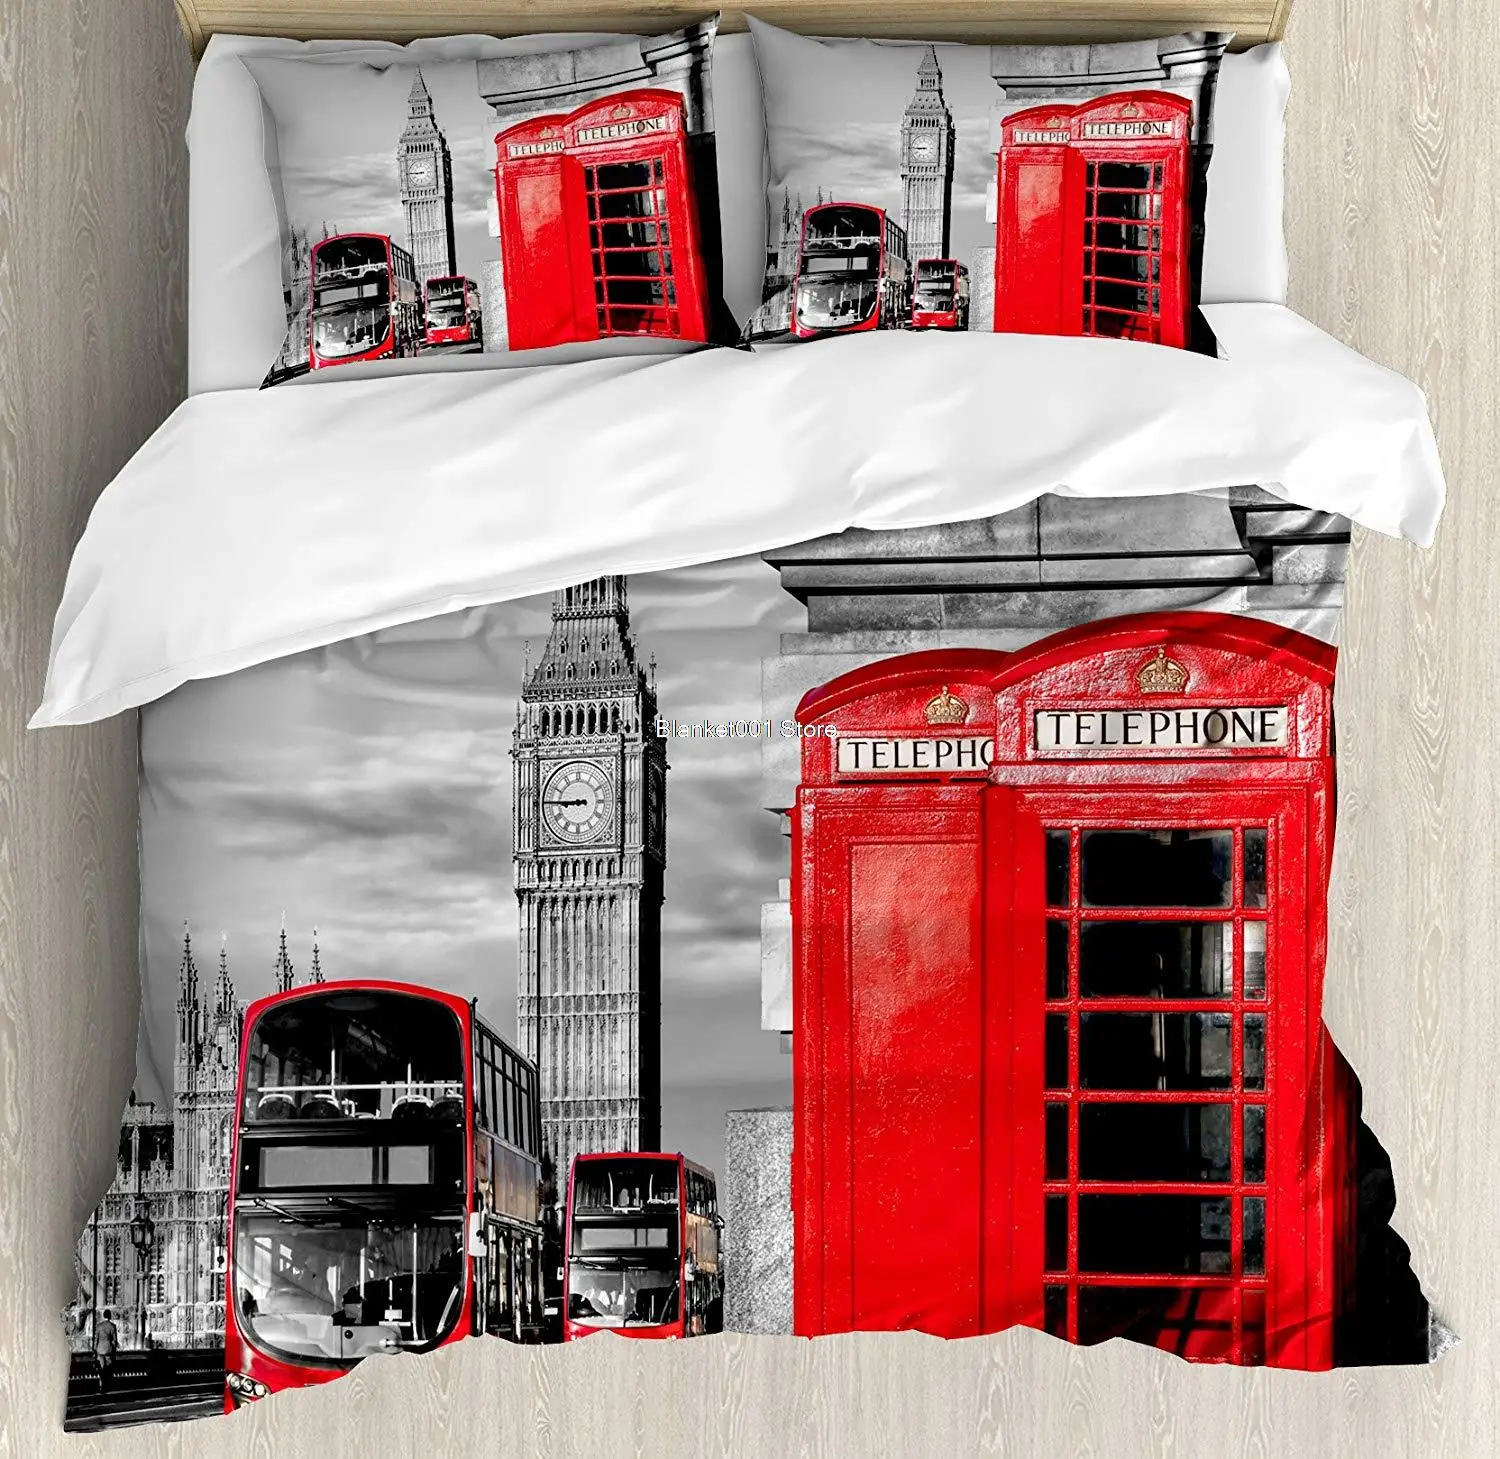 

London Duvet Cover Set London Telephone Booth in The Street Traditional Local Cultural England UK Retro Decorative 3 Piece Bed